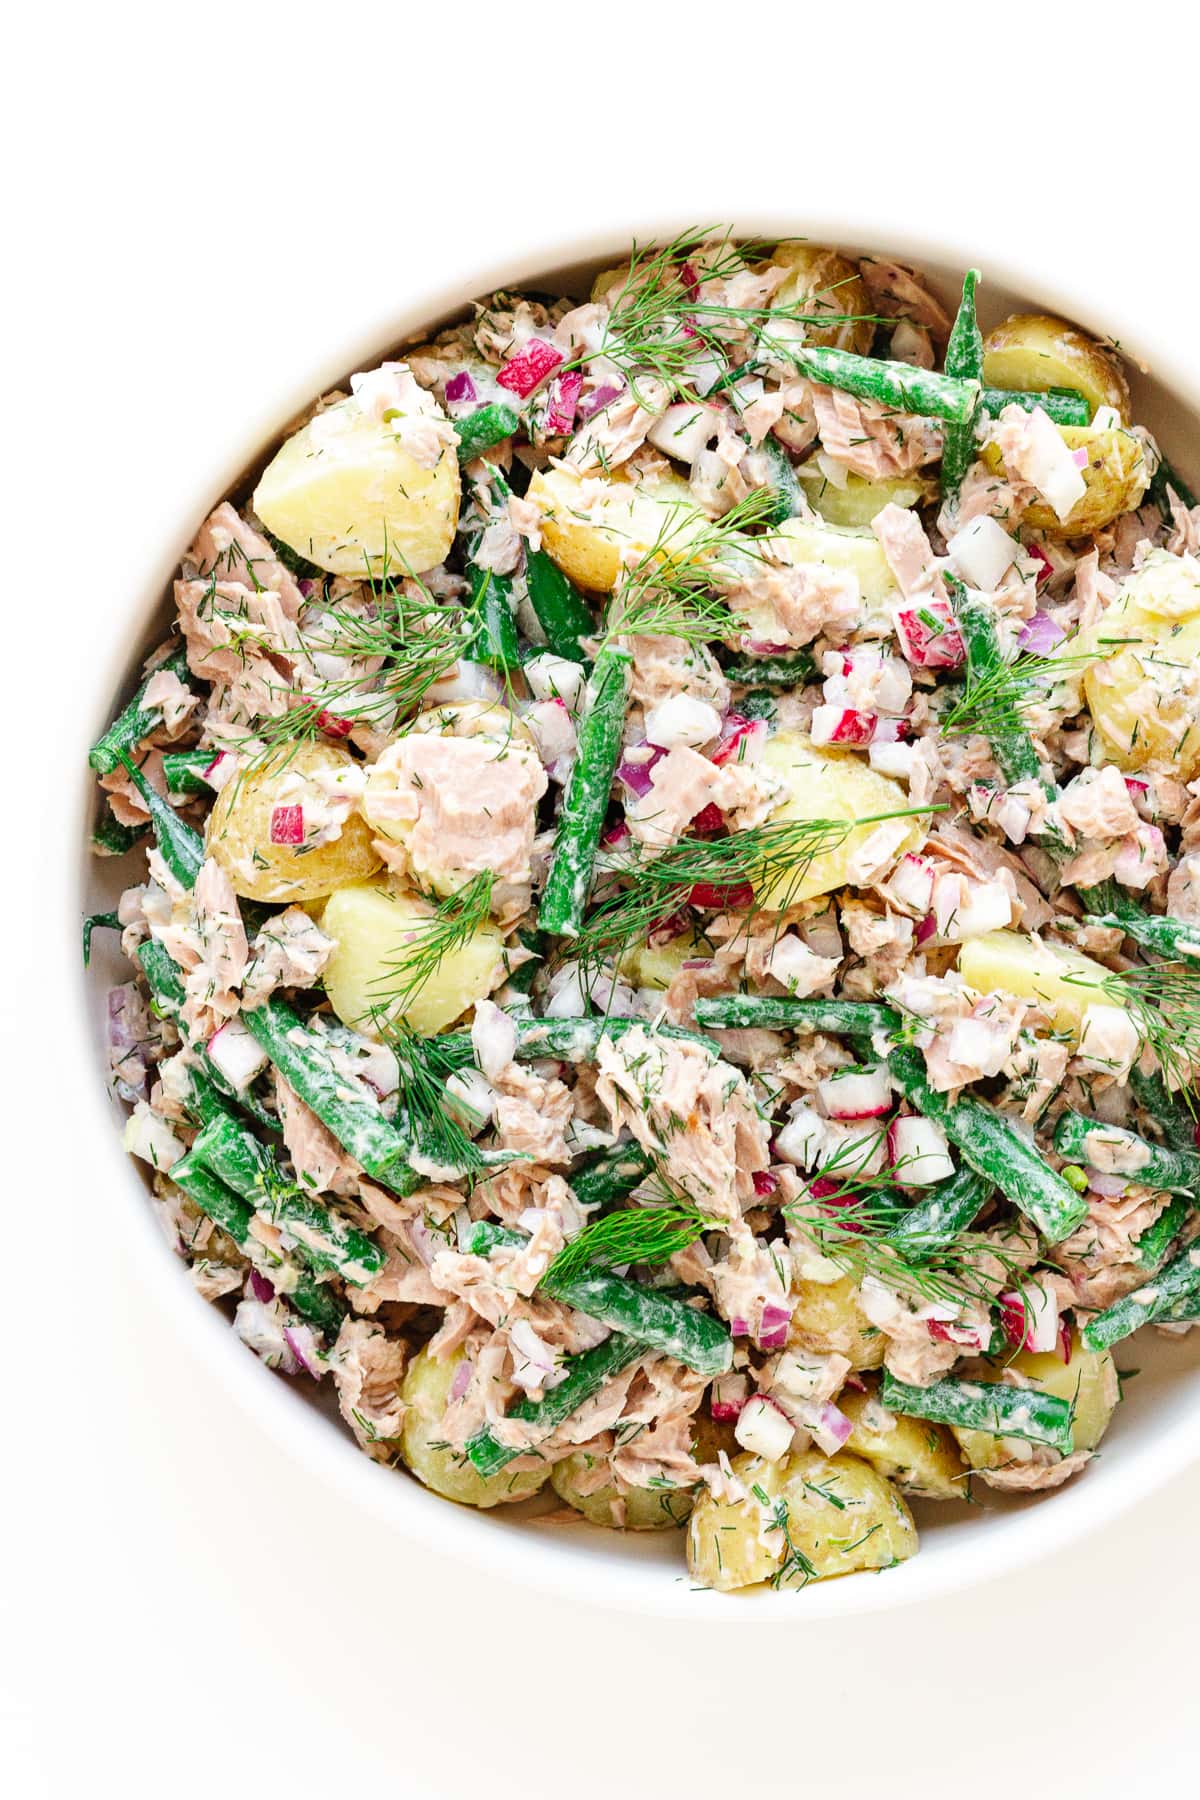 Tuna Potato Salad with dill buttermilk dressing in a white serving bowl.